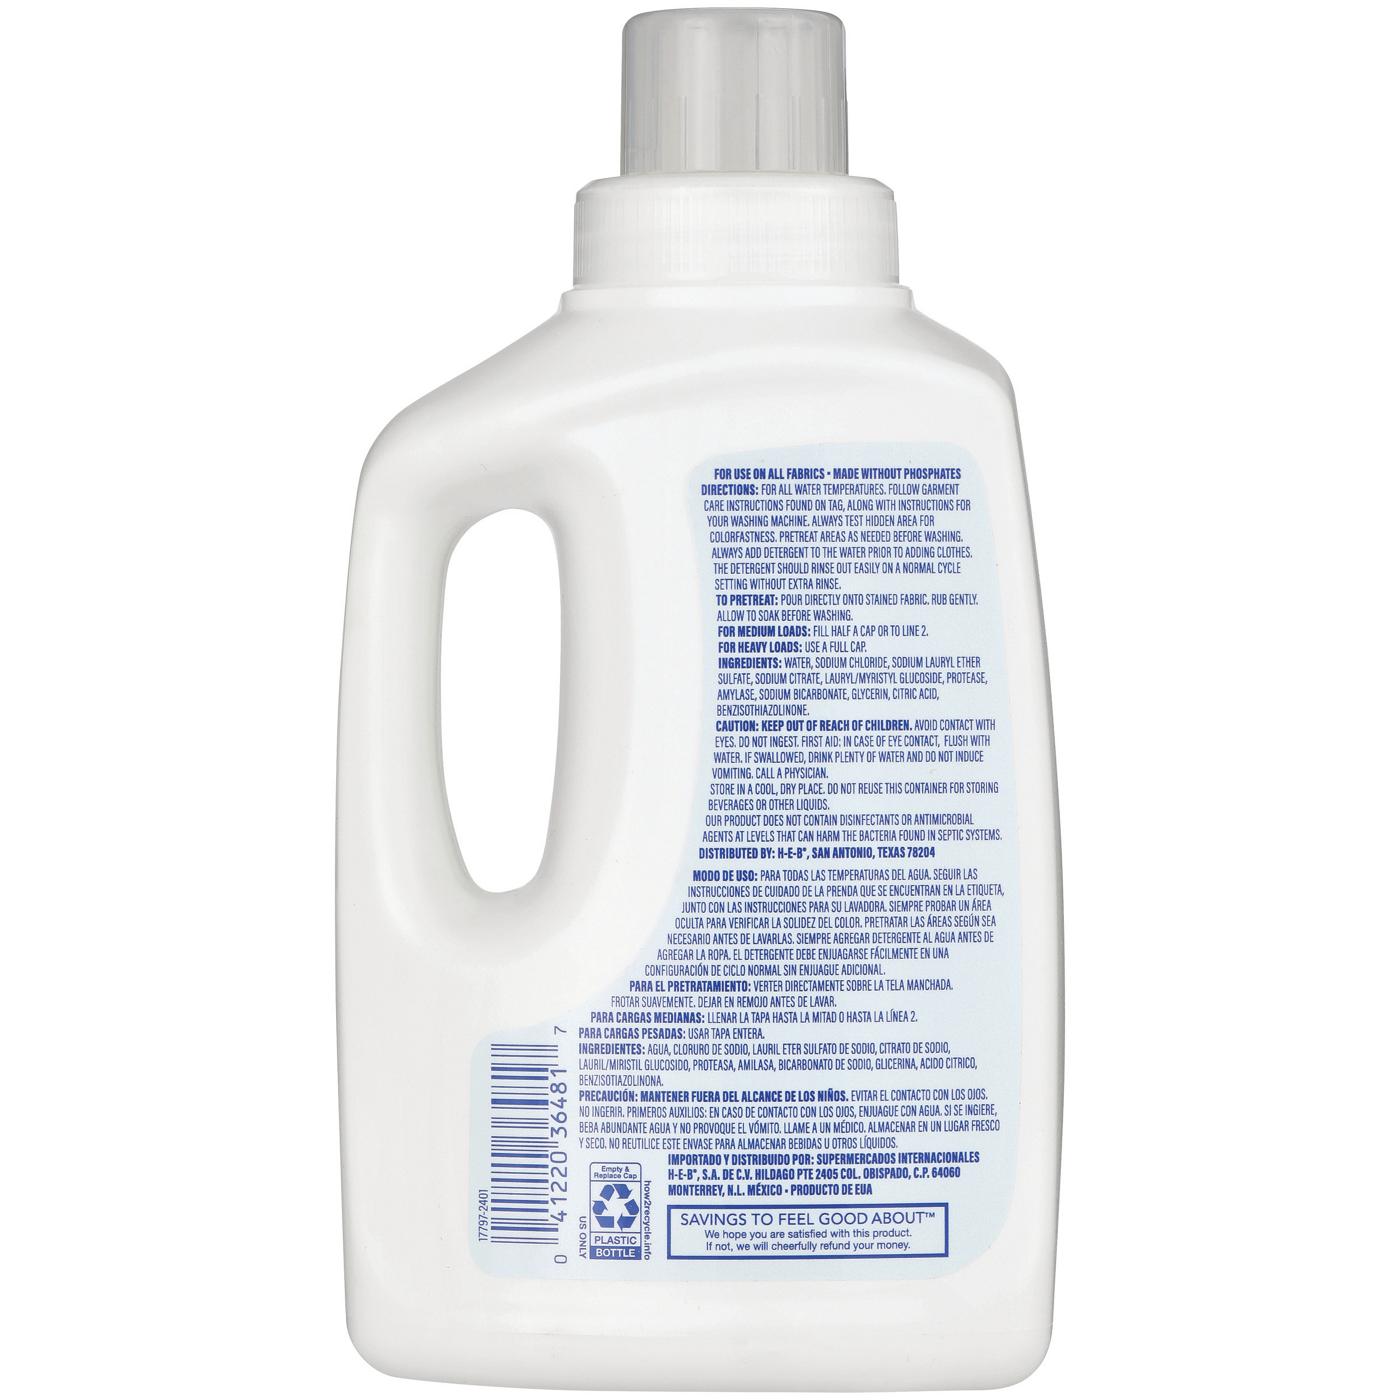 Hill Country Fare Free & Clear HE Liquid Laundry Detergent, 32 Loads - Fragrance-Free; image 2 of 2